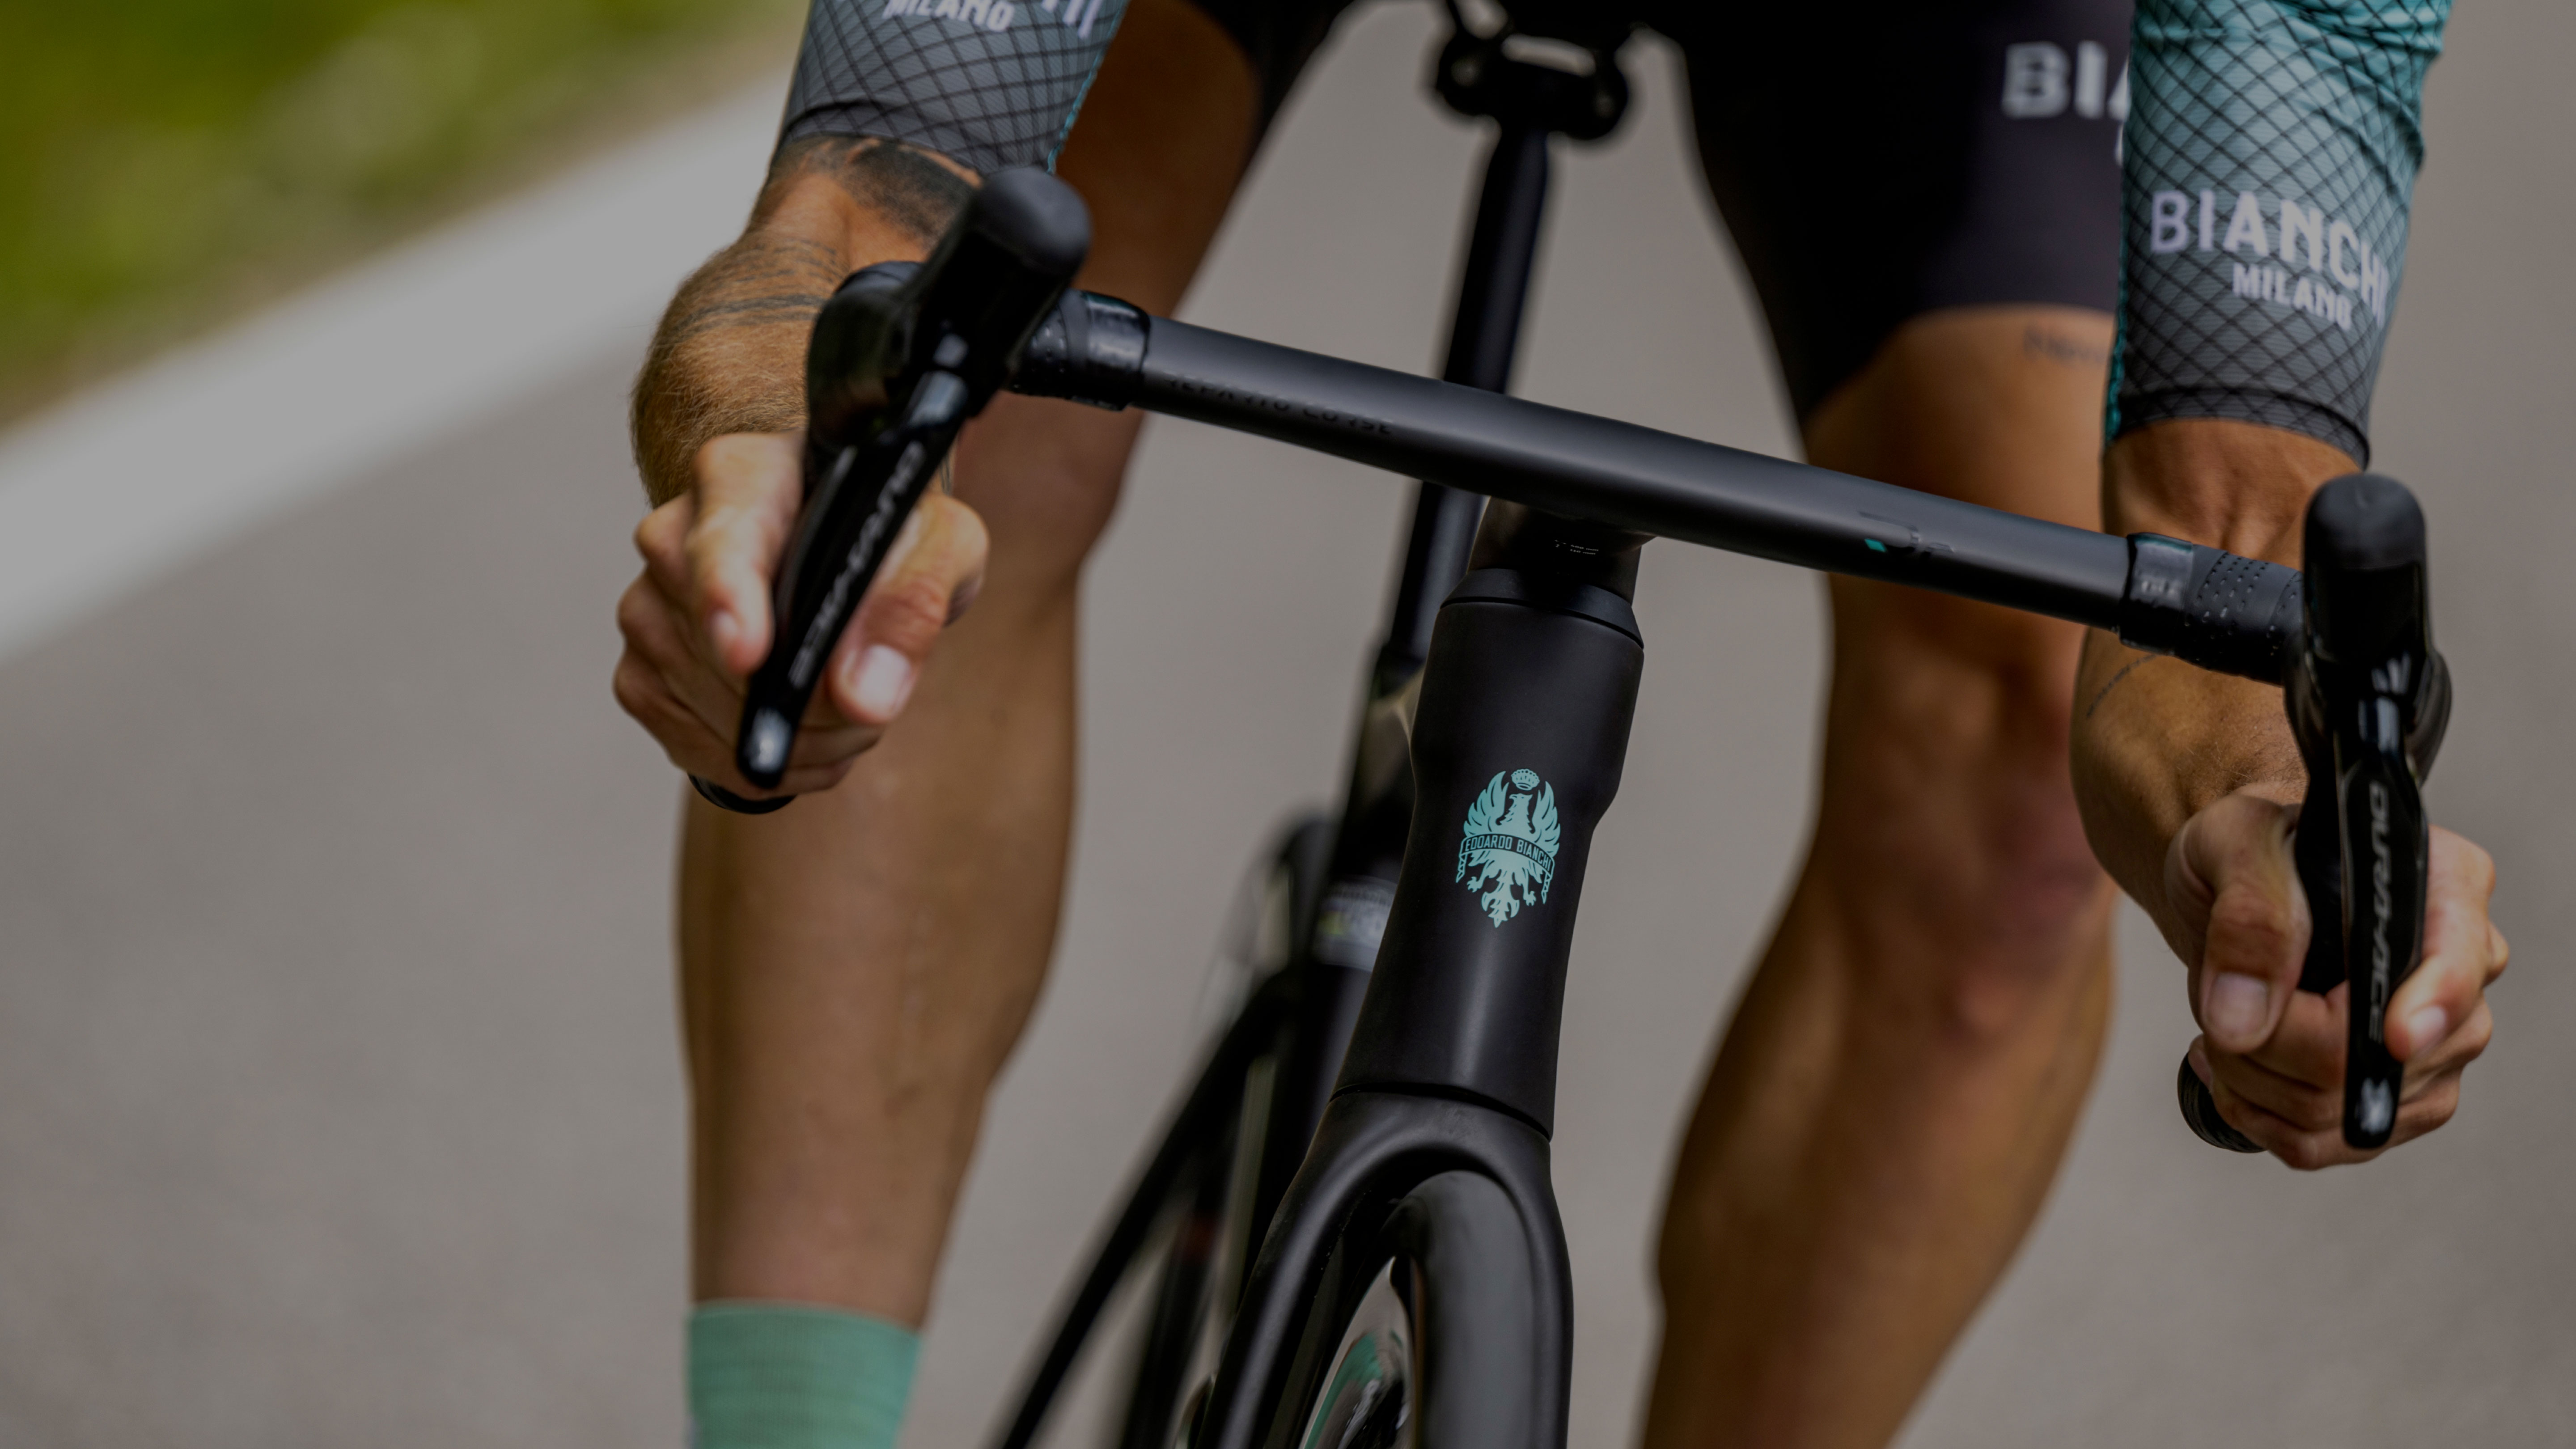 Bianchi Performance bicycles since 1885